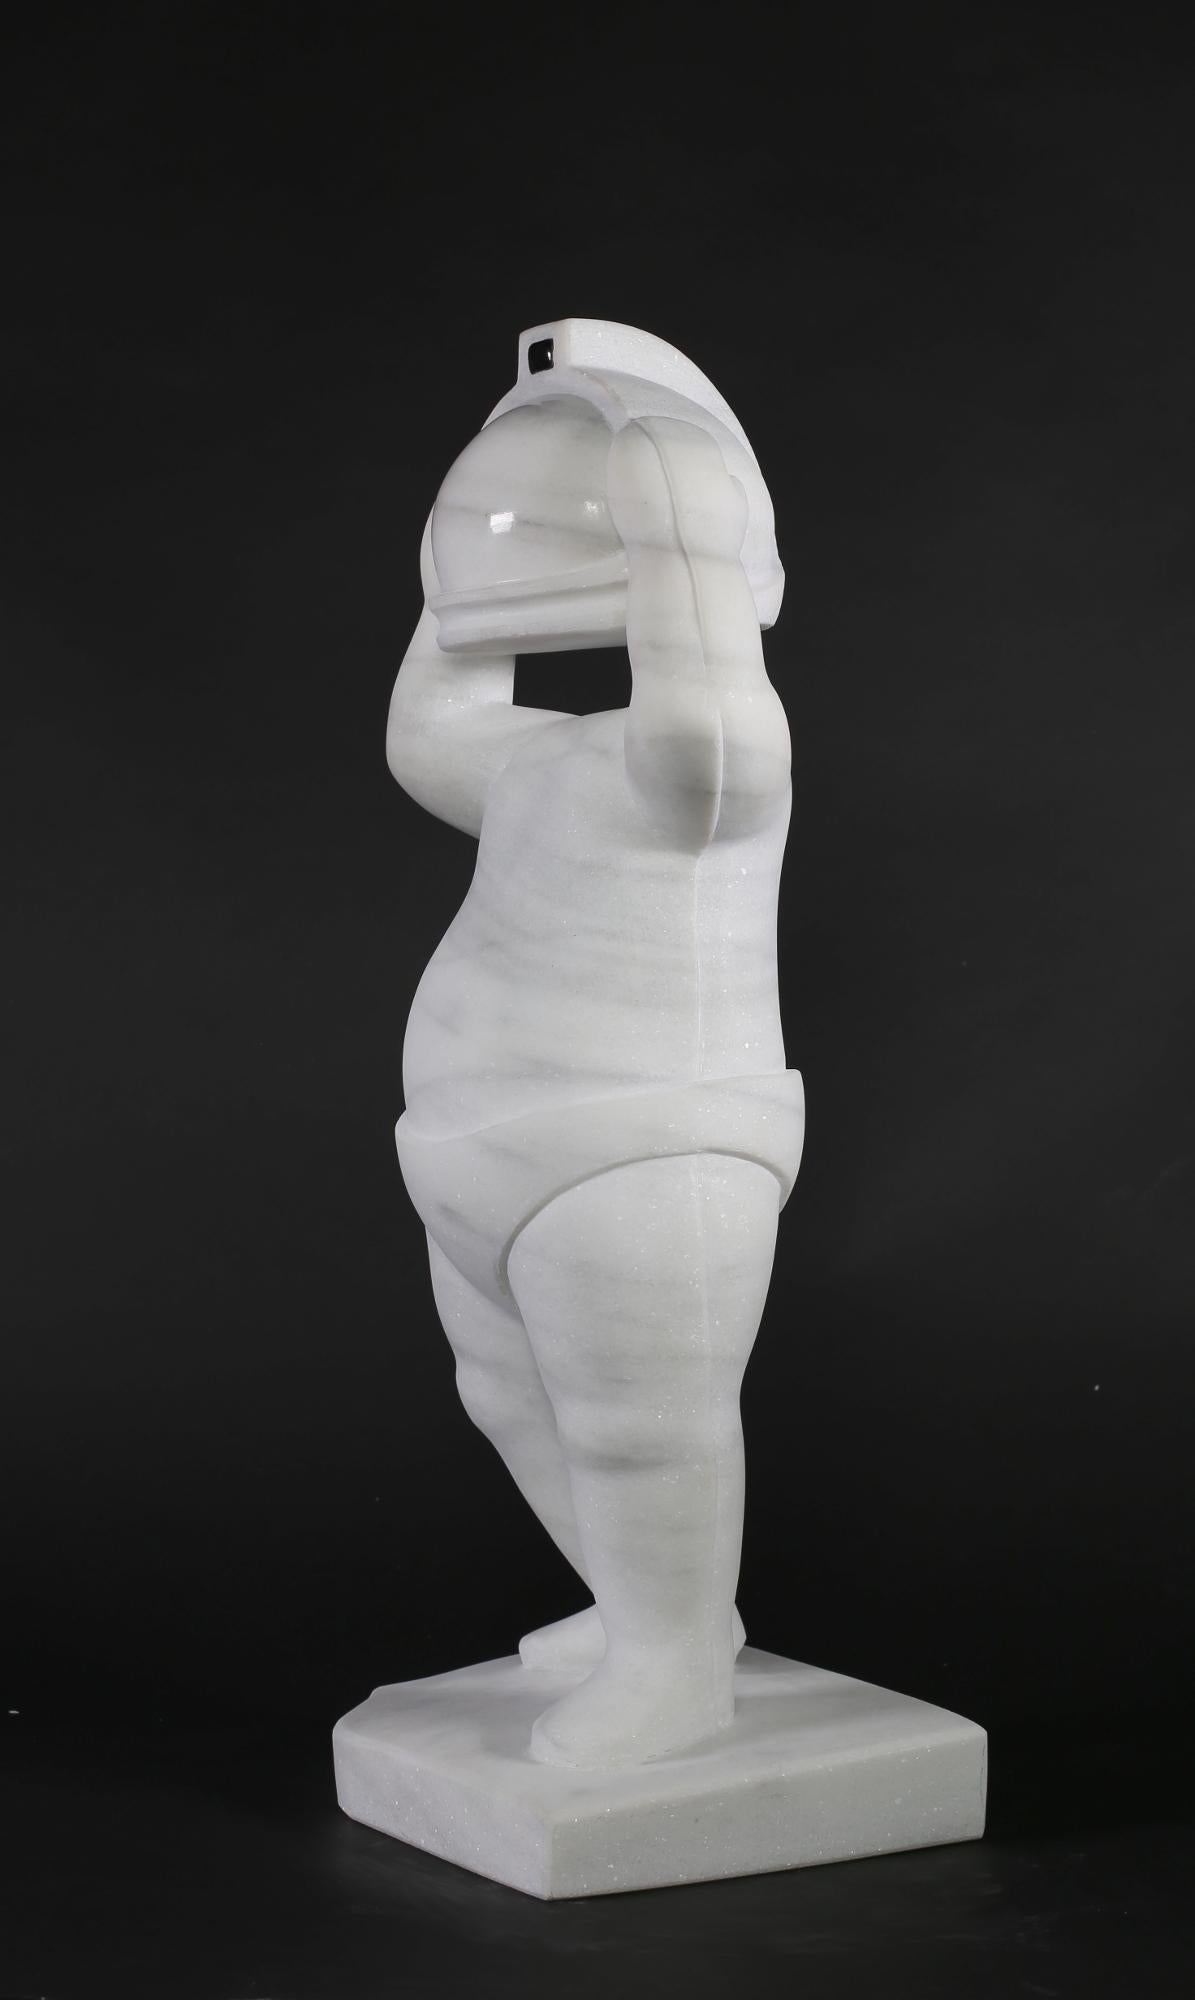 New Age Explorers. Nº1 Without Neck. Figurative Marble Sculpture by Mario Romero 2